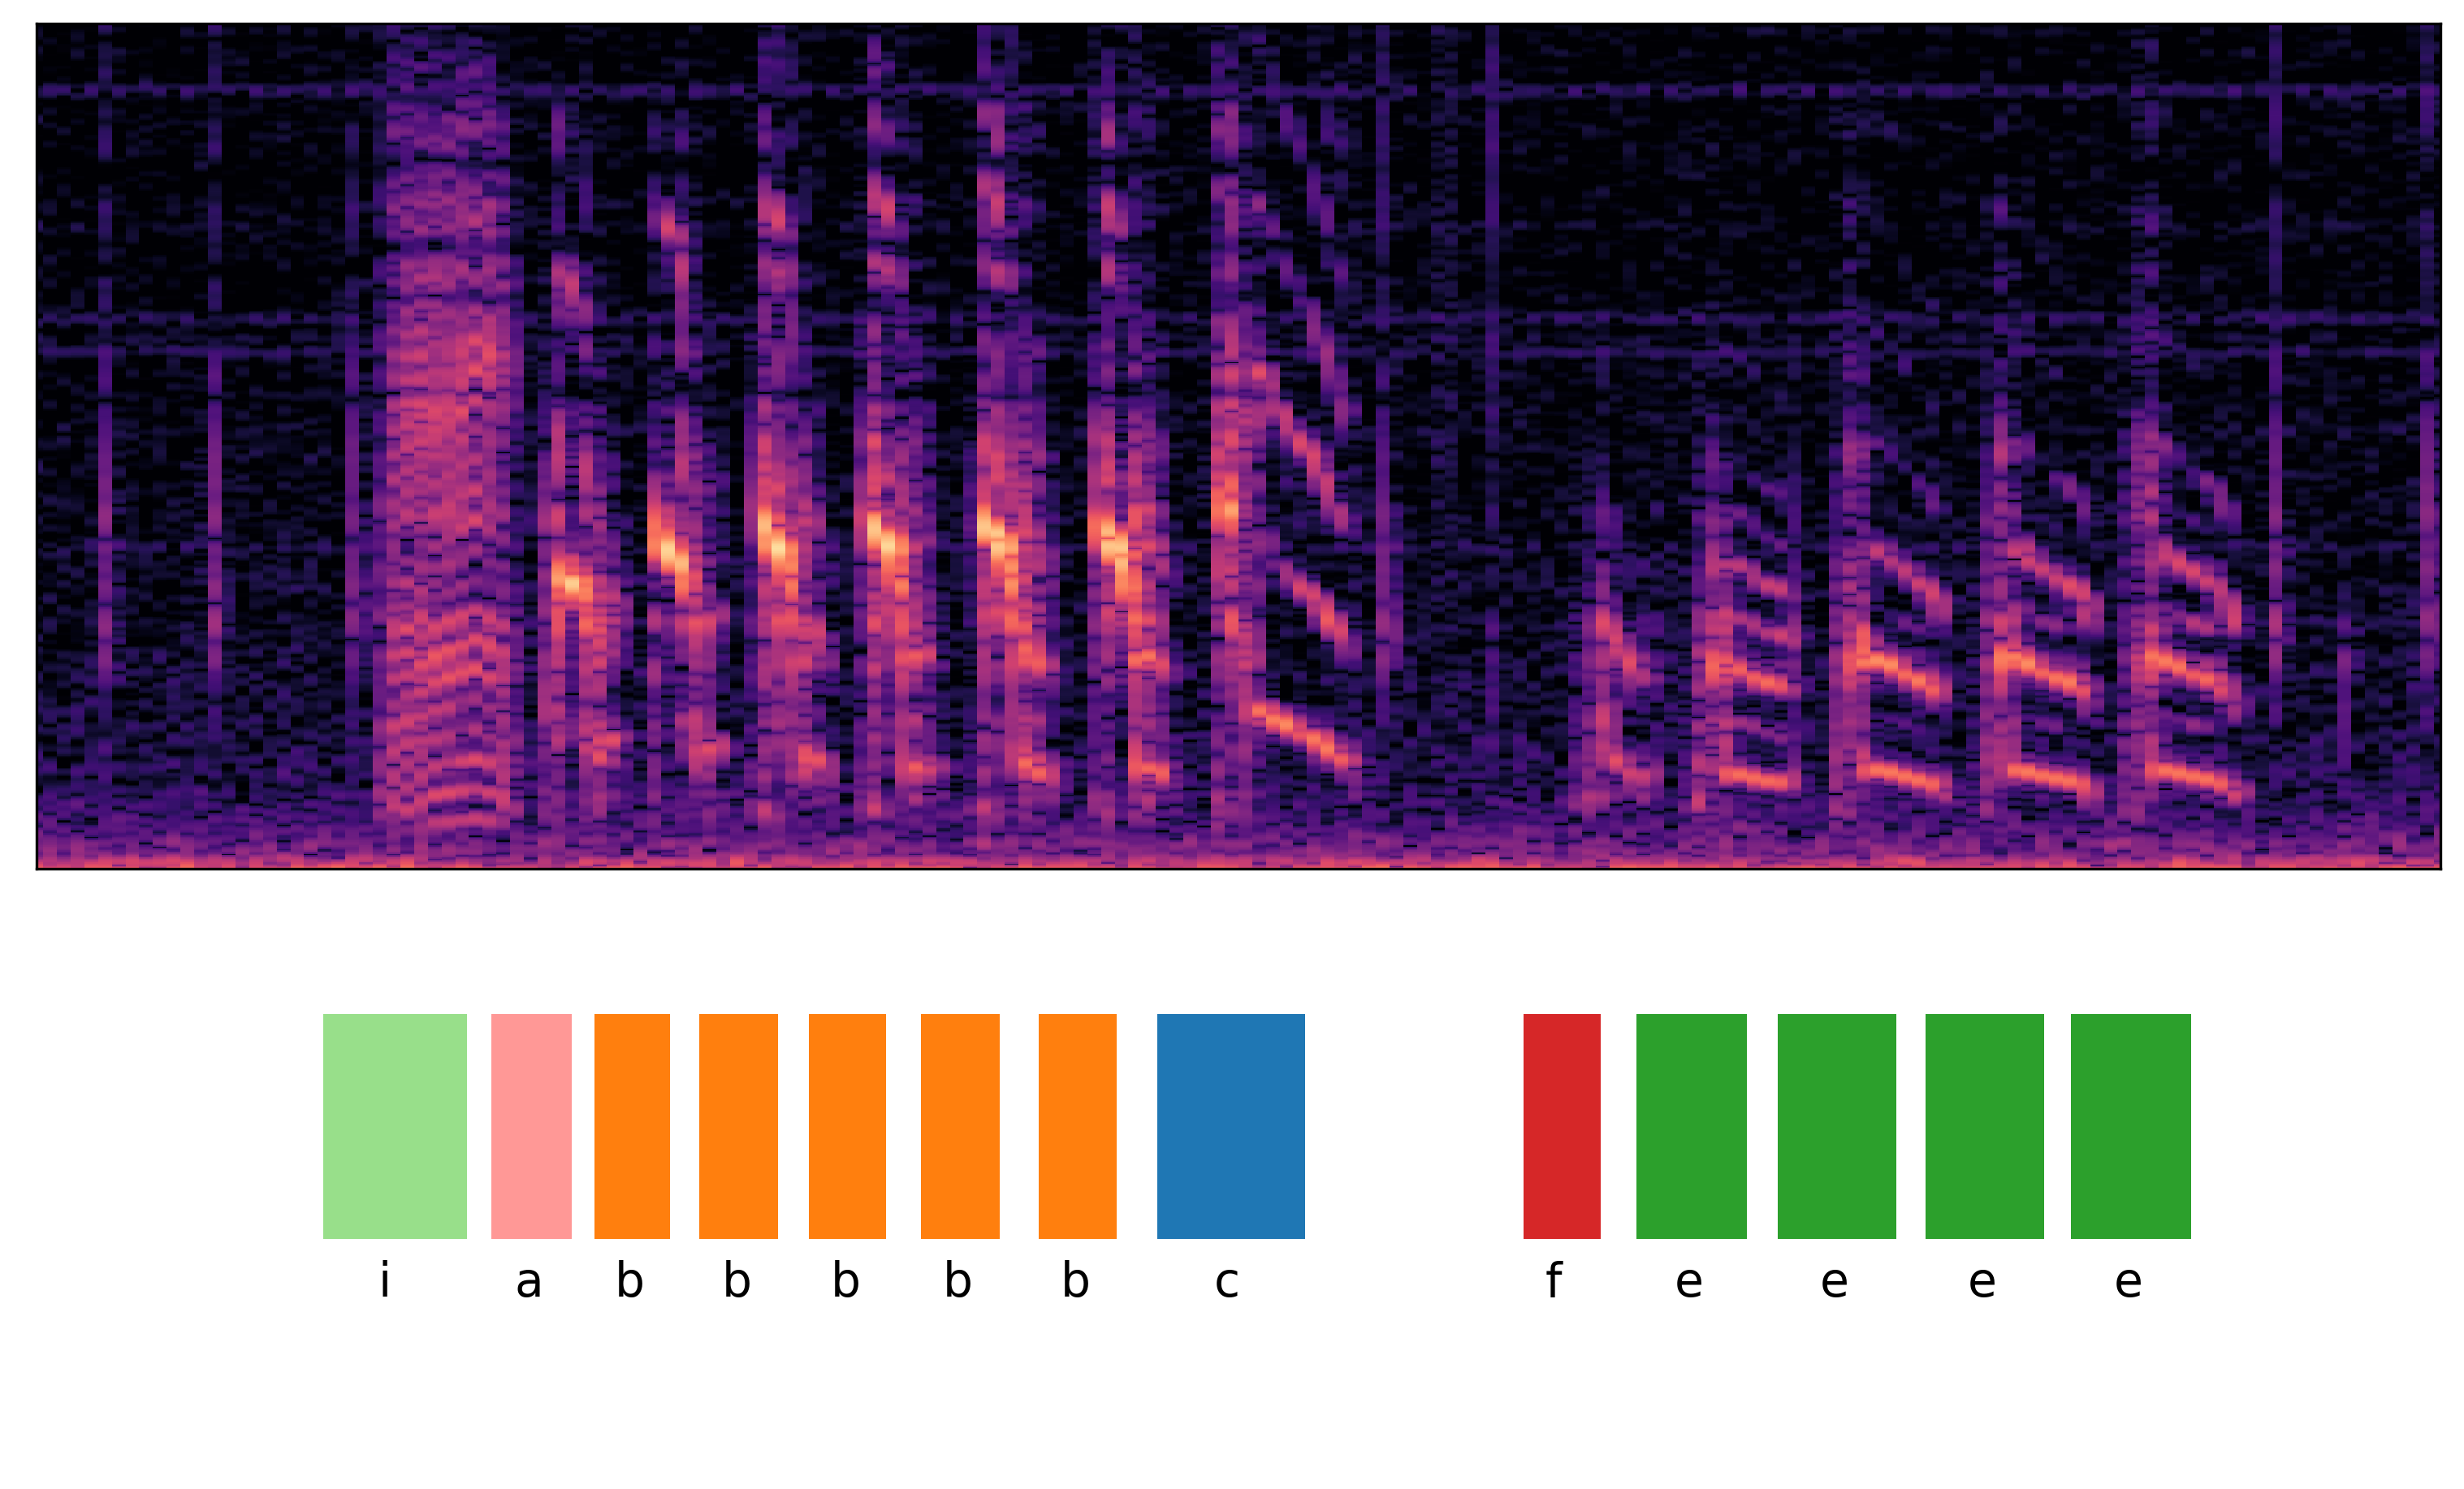 Spectrogram showing snippet of Bengalese finch song with annotated syllables, for bird with ID bl26lb16